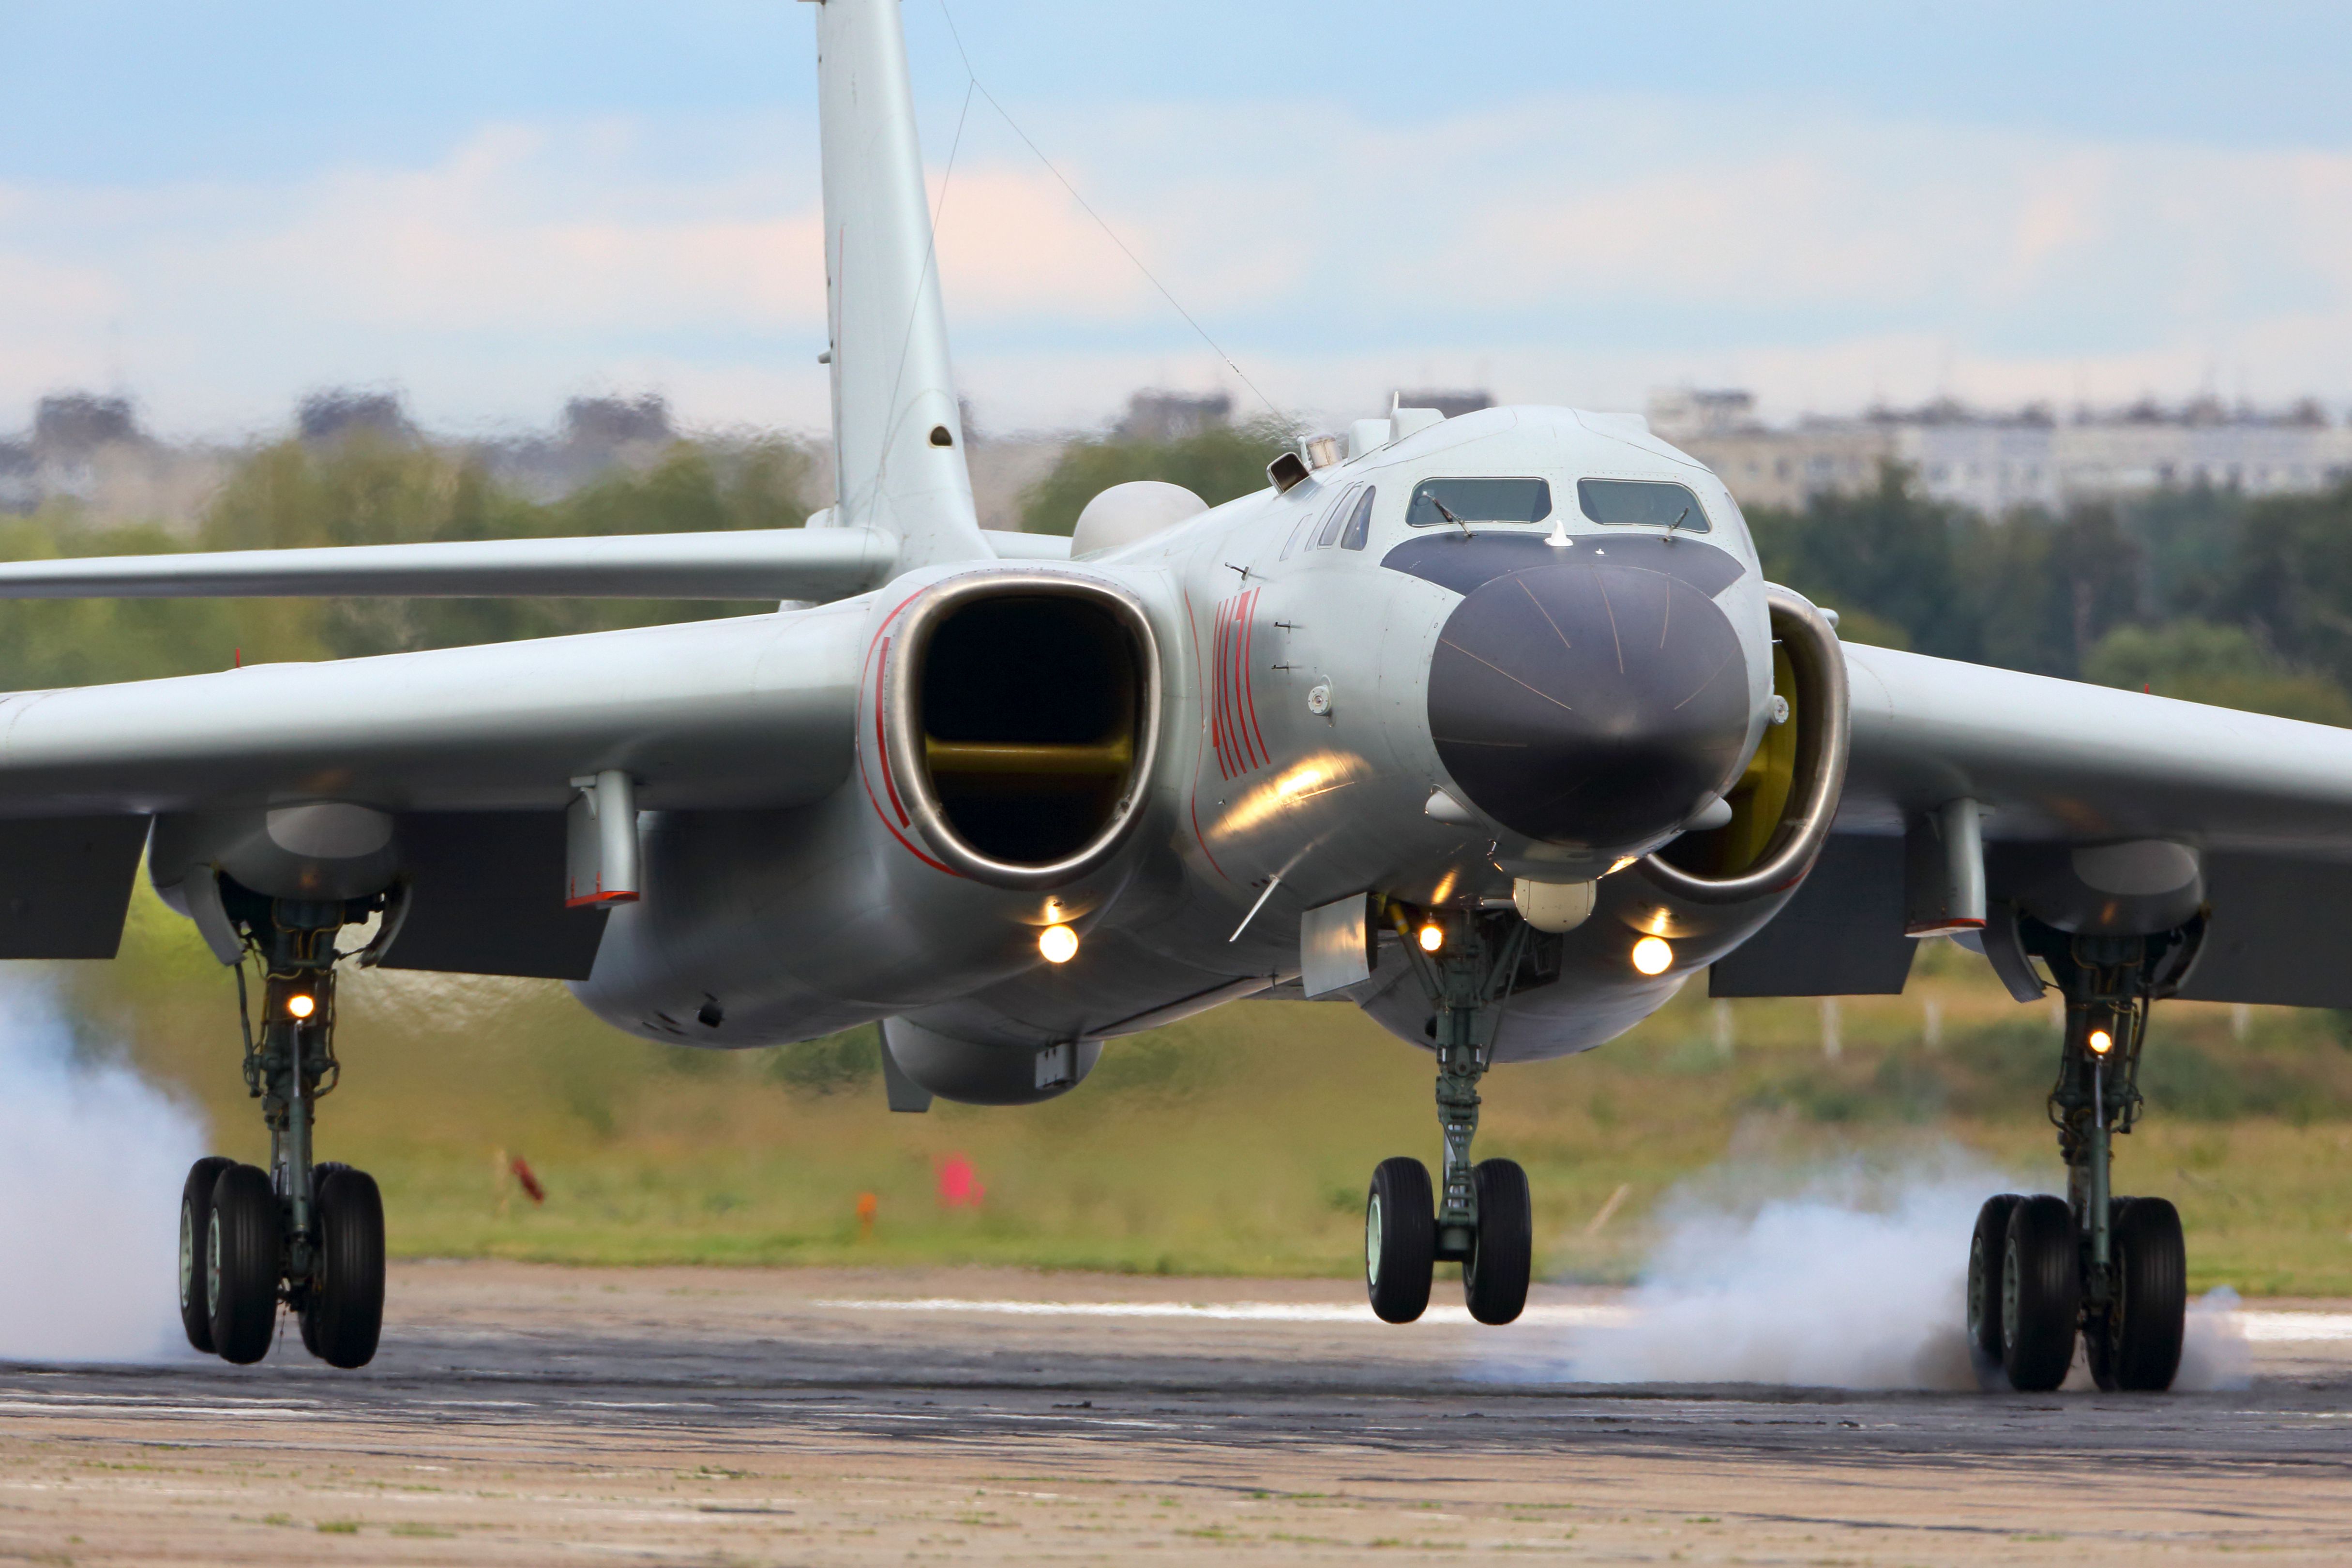 A Xian H-6K strategic bomber airplane of the People's Liberation Army Air Force seen at Dyagilevo airfield during Aviadarts contest.